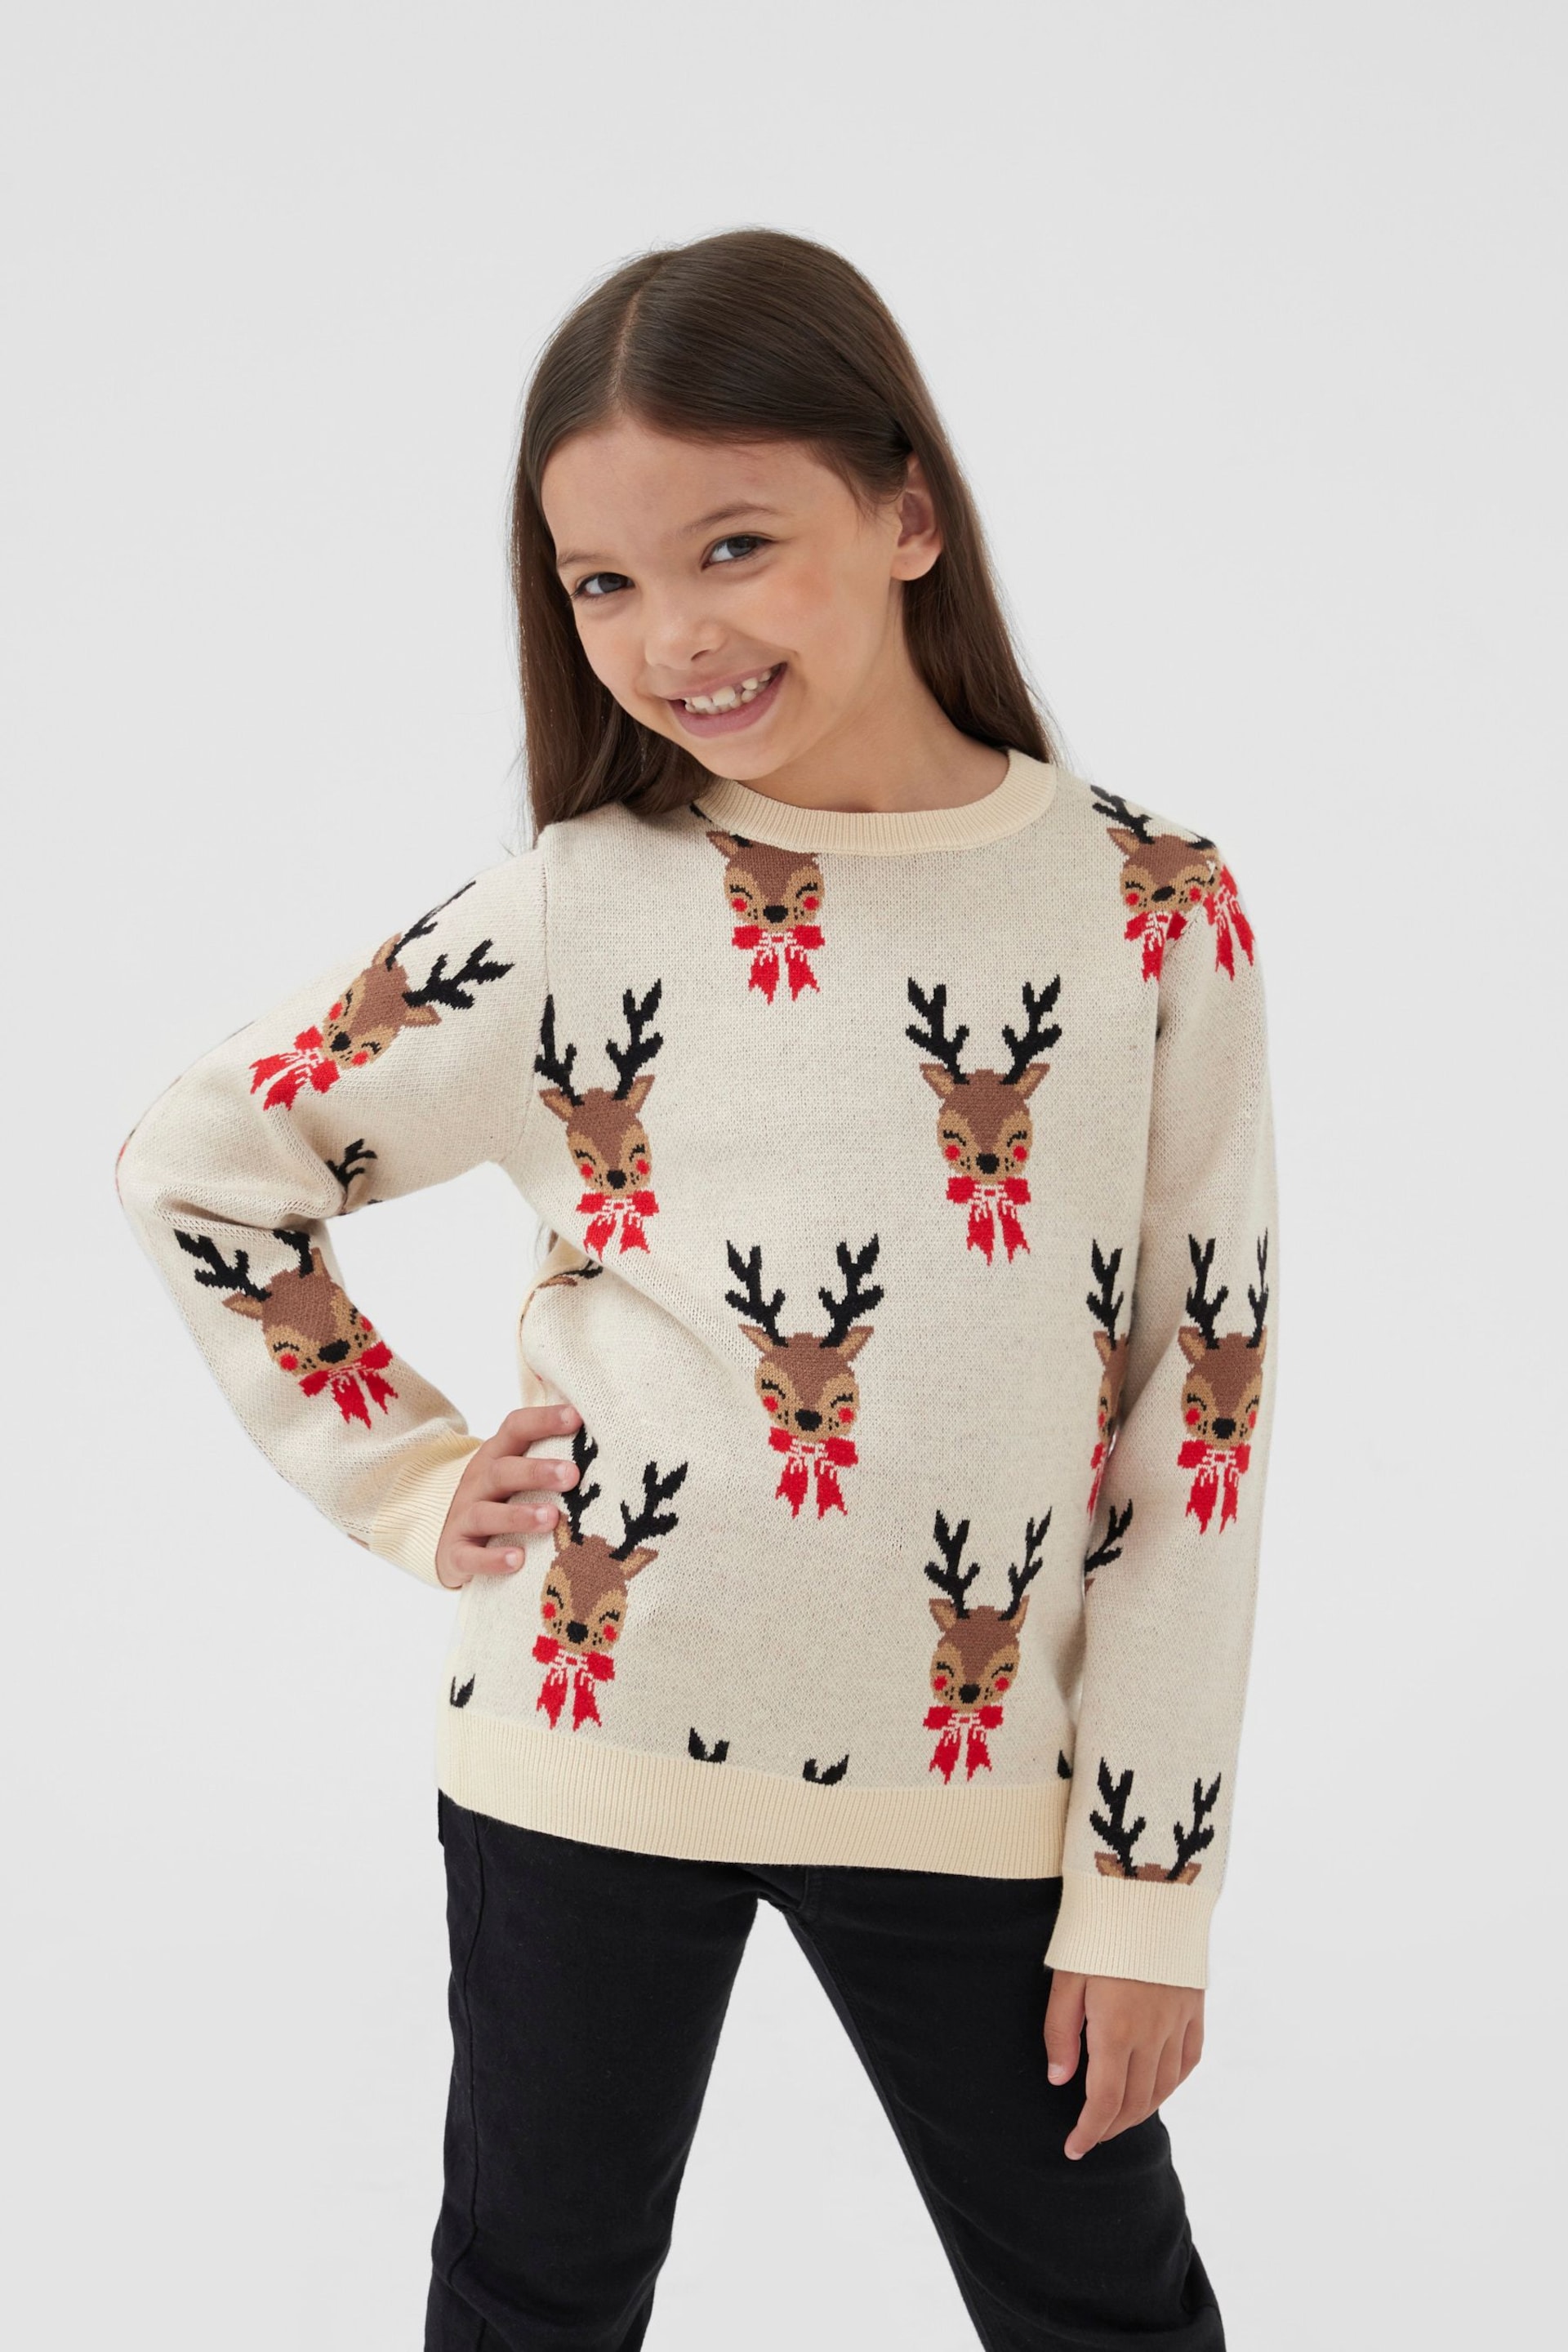 Society 8 White Cupid Christmas Jumper - Girls - Image 1 of 3